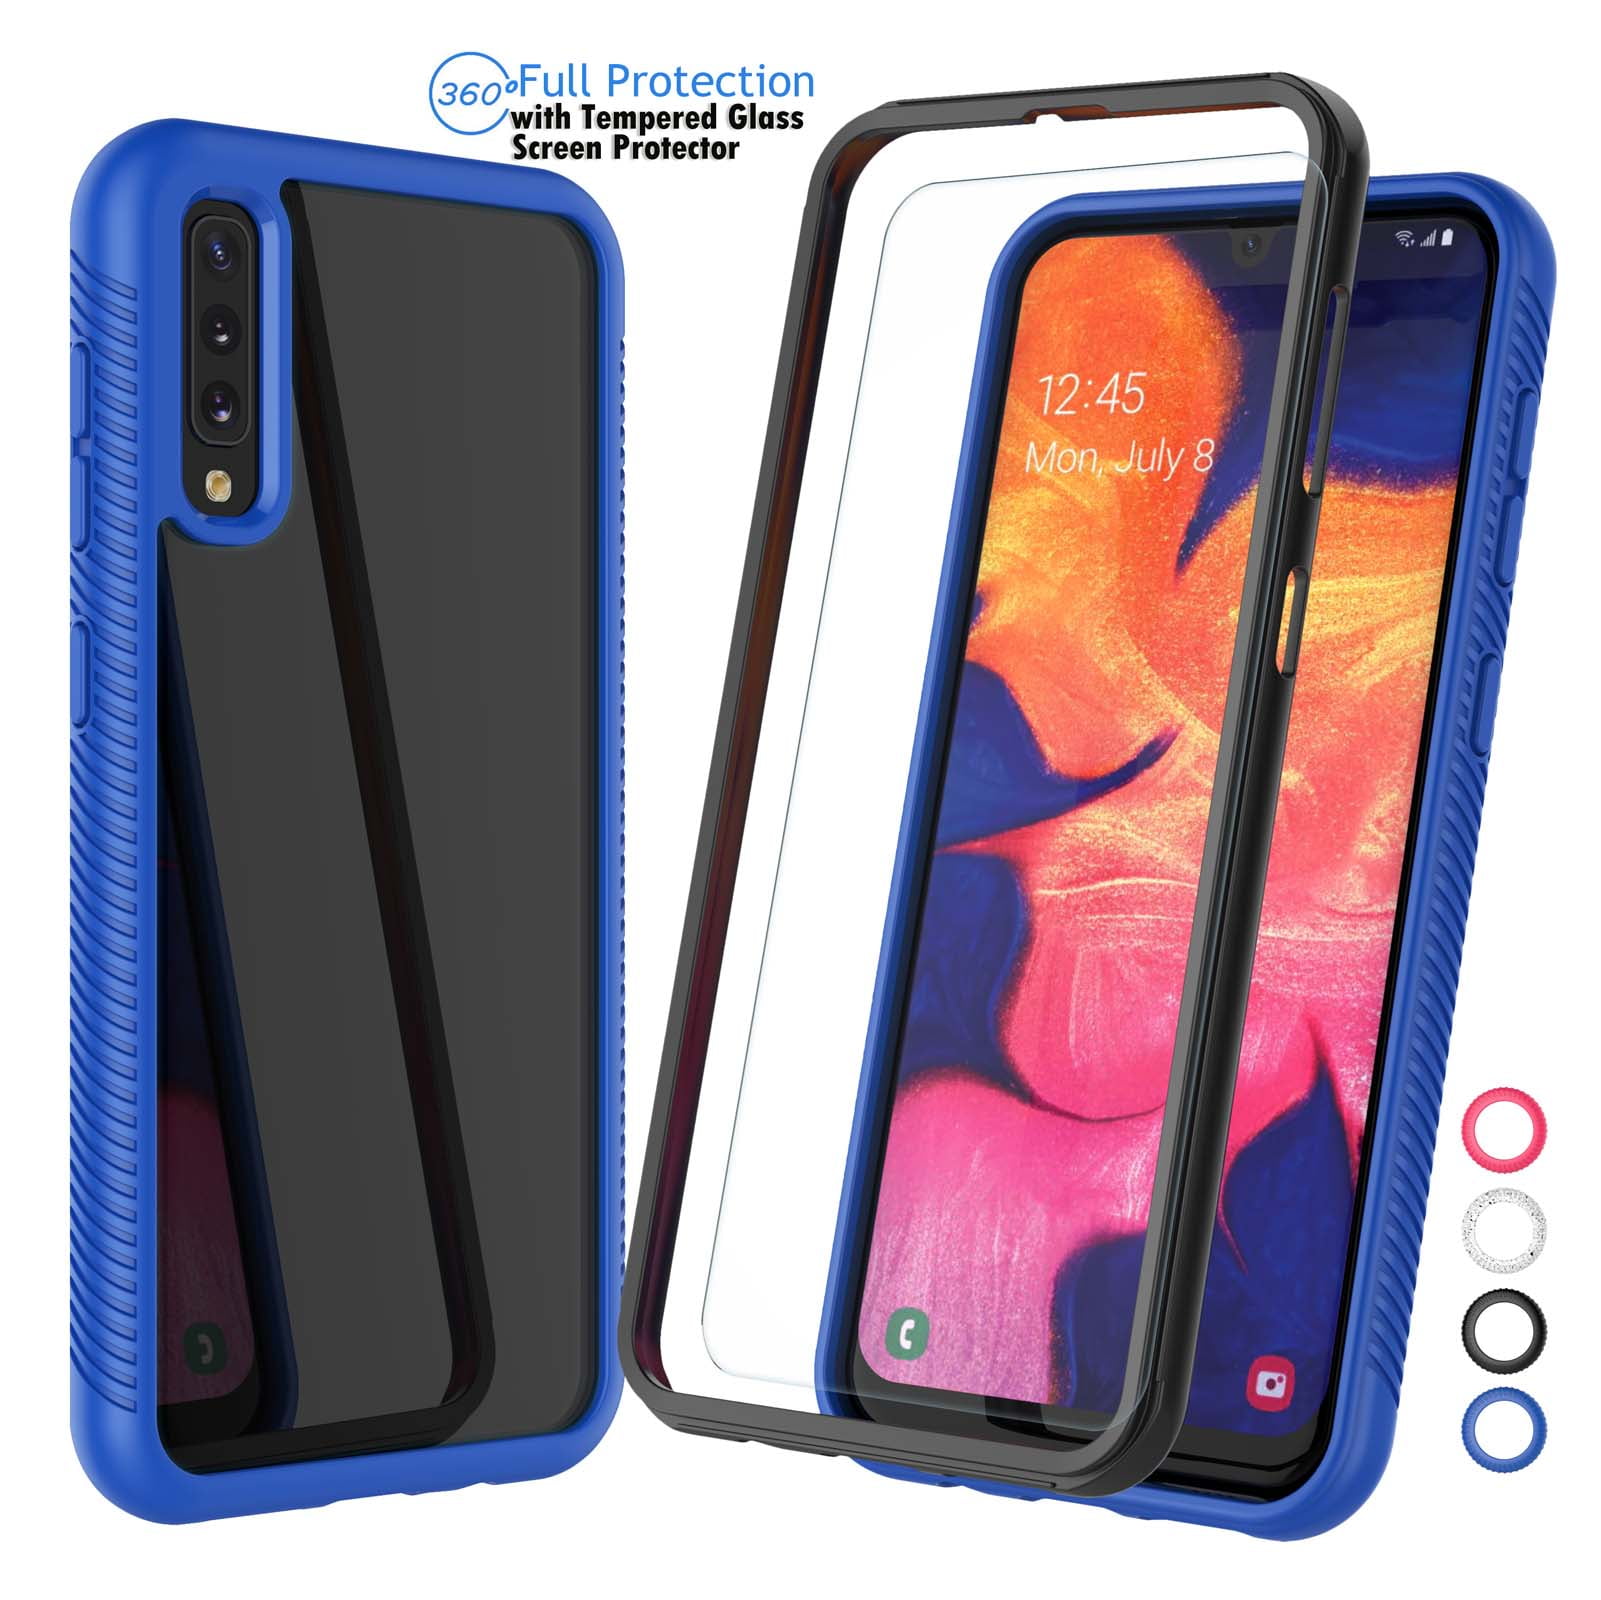 opslag Ongelijkheid Purper Galaxy A50 Case, Case Cover for Samsung A50 / A505U, Njjex Full-Body Rugged  Transparent Clear Back Bumper Galaxy A50 Case [with Screen Protector] for  Galaxy A50 6.4" 2019 - Walmart.com